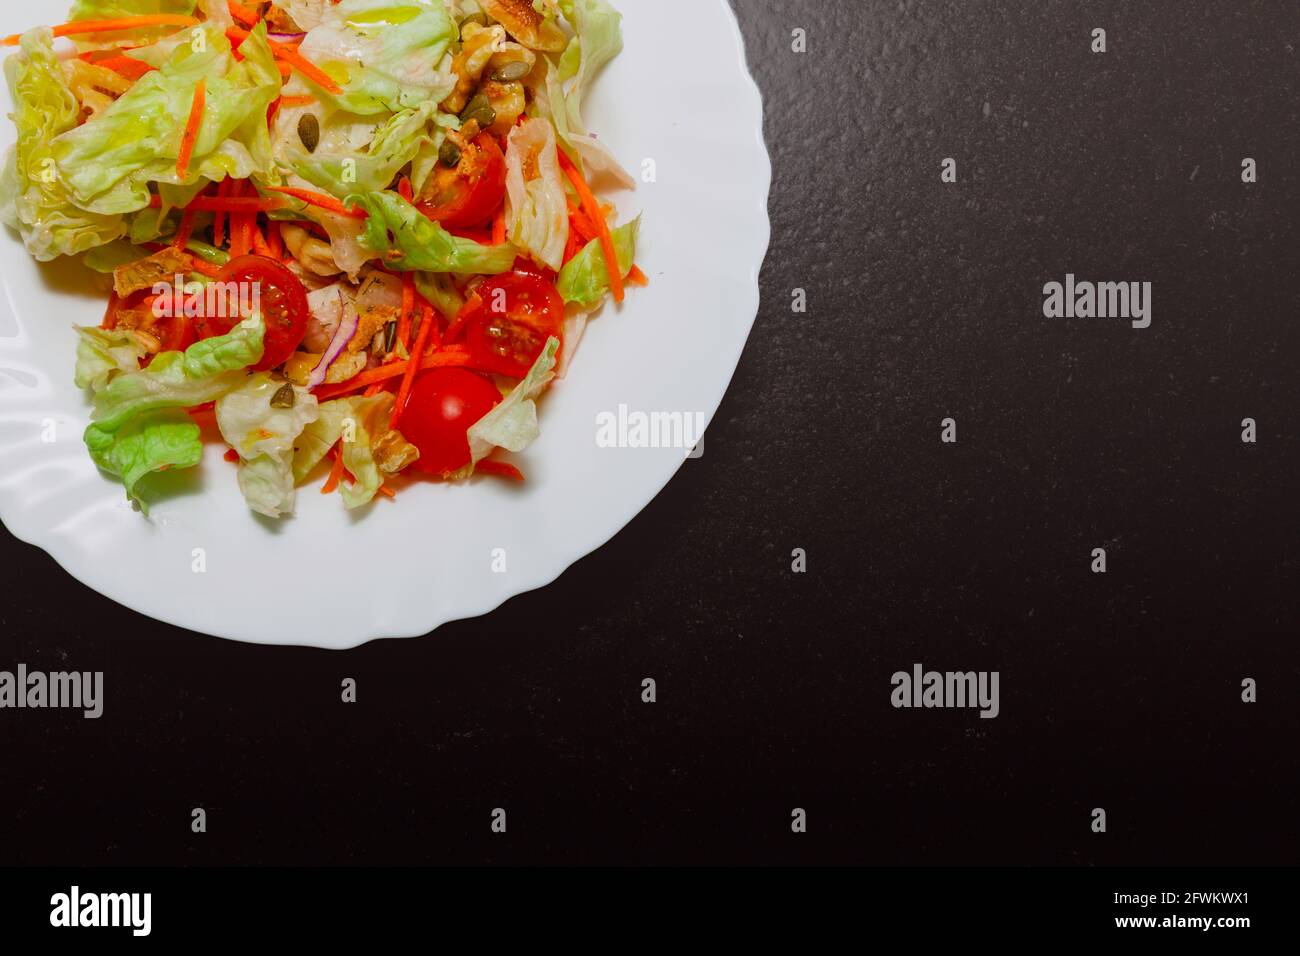 There is a salad plate in a corner of the picture, part of the plate is hidden. The ingredients are: lettuce, cherry tomato, carrot, walnuts, and pump Stock Photo